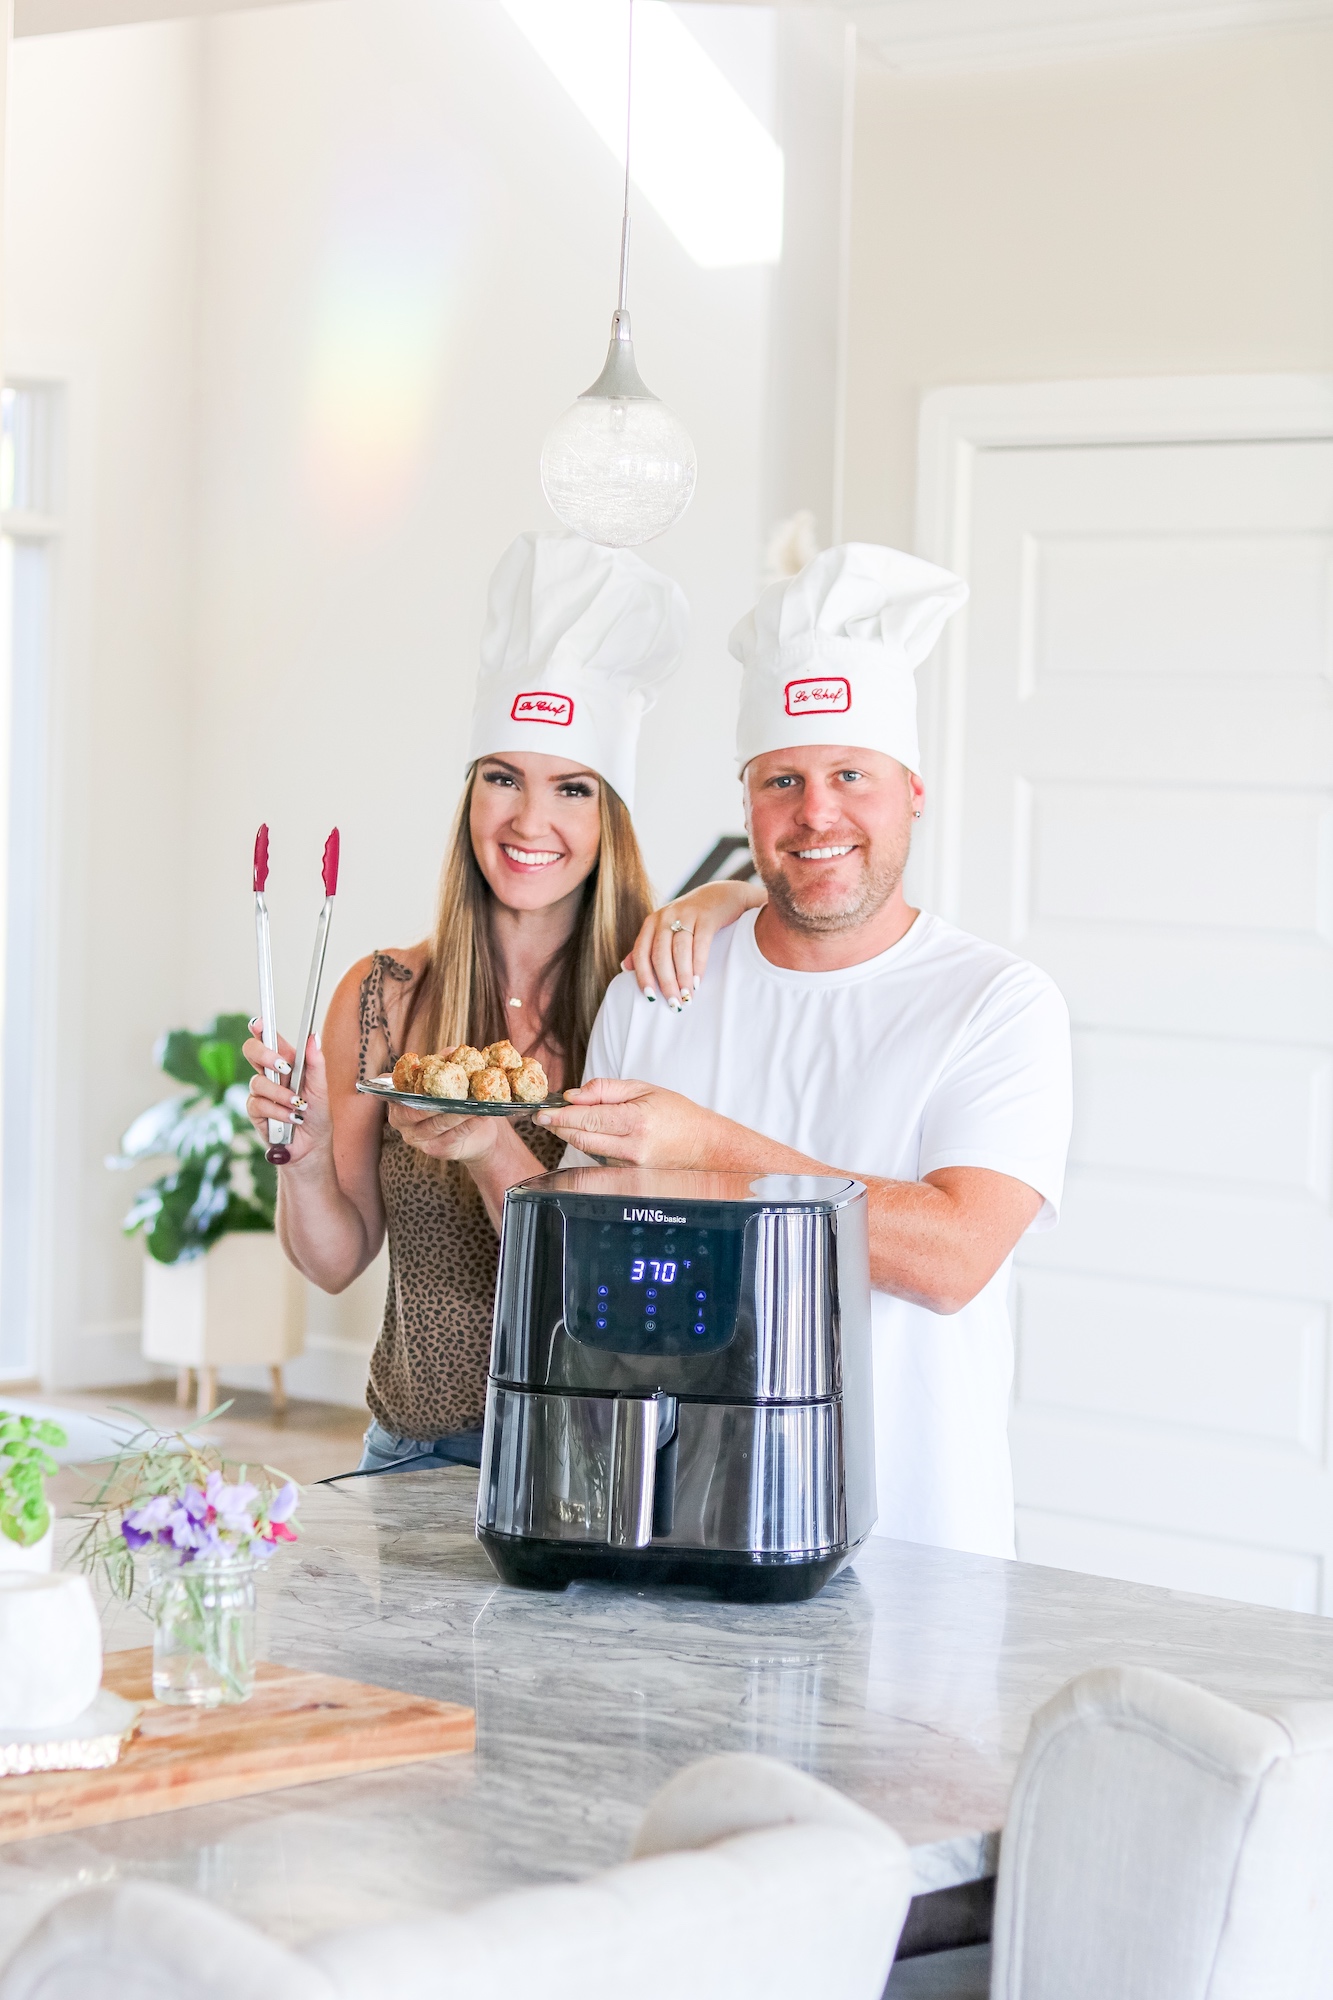 Cooking in the kitchen with digital air fryer